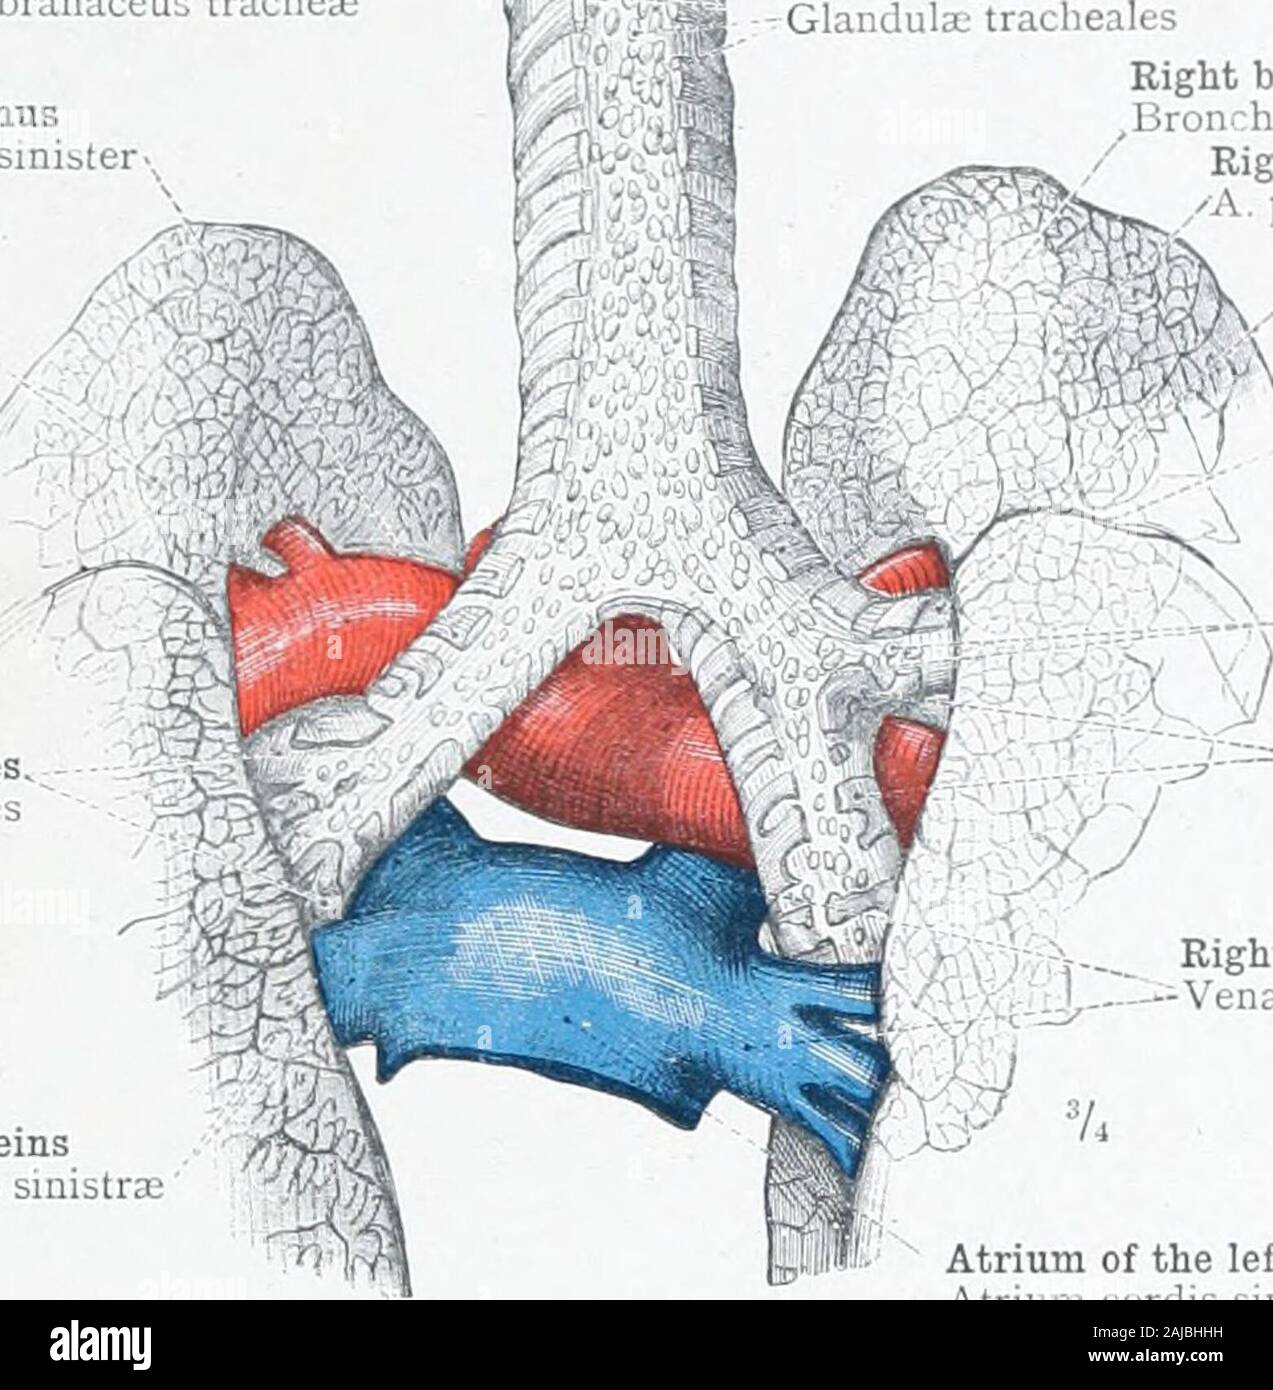 An atlas of human anatomy for students and physicians . Boundary lines of thepulmonary lobules Ligamentum latumpulmonis, or broadligament of the lungLis pulmonaleInferior borderMargo inferiorLower, phrenic, or diaphragmatic surface—Facies diaphragmatica l.Ki. 787.—Left Lung. Inner or MediastinalSurface, with the Root of the Lung cutacross. Pulmo—The lung. RESPIRATORY ORGANS 465 Membranous wall of the trachea Iaries membranaceub tracheaL Left bronchusBronchus sinister Left pulmonary artery A. pulraonalis (ramus sinister) Hyparterial bronchial branches.Rami bronchiales hyparteriales Left pulmona Stock Photo